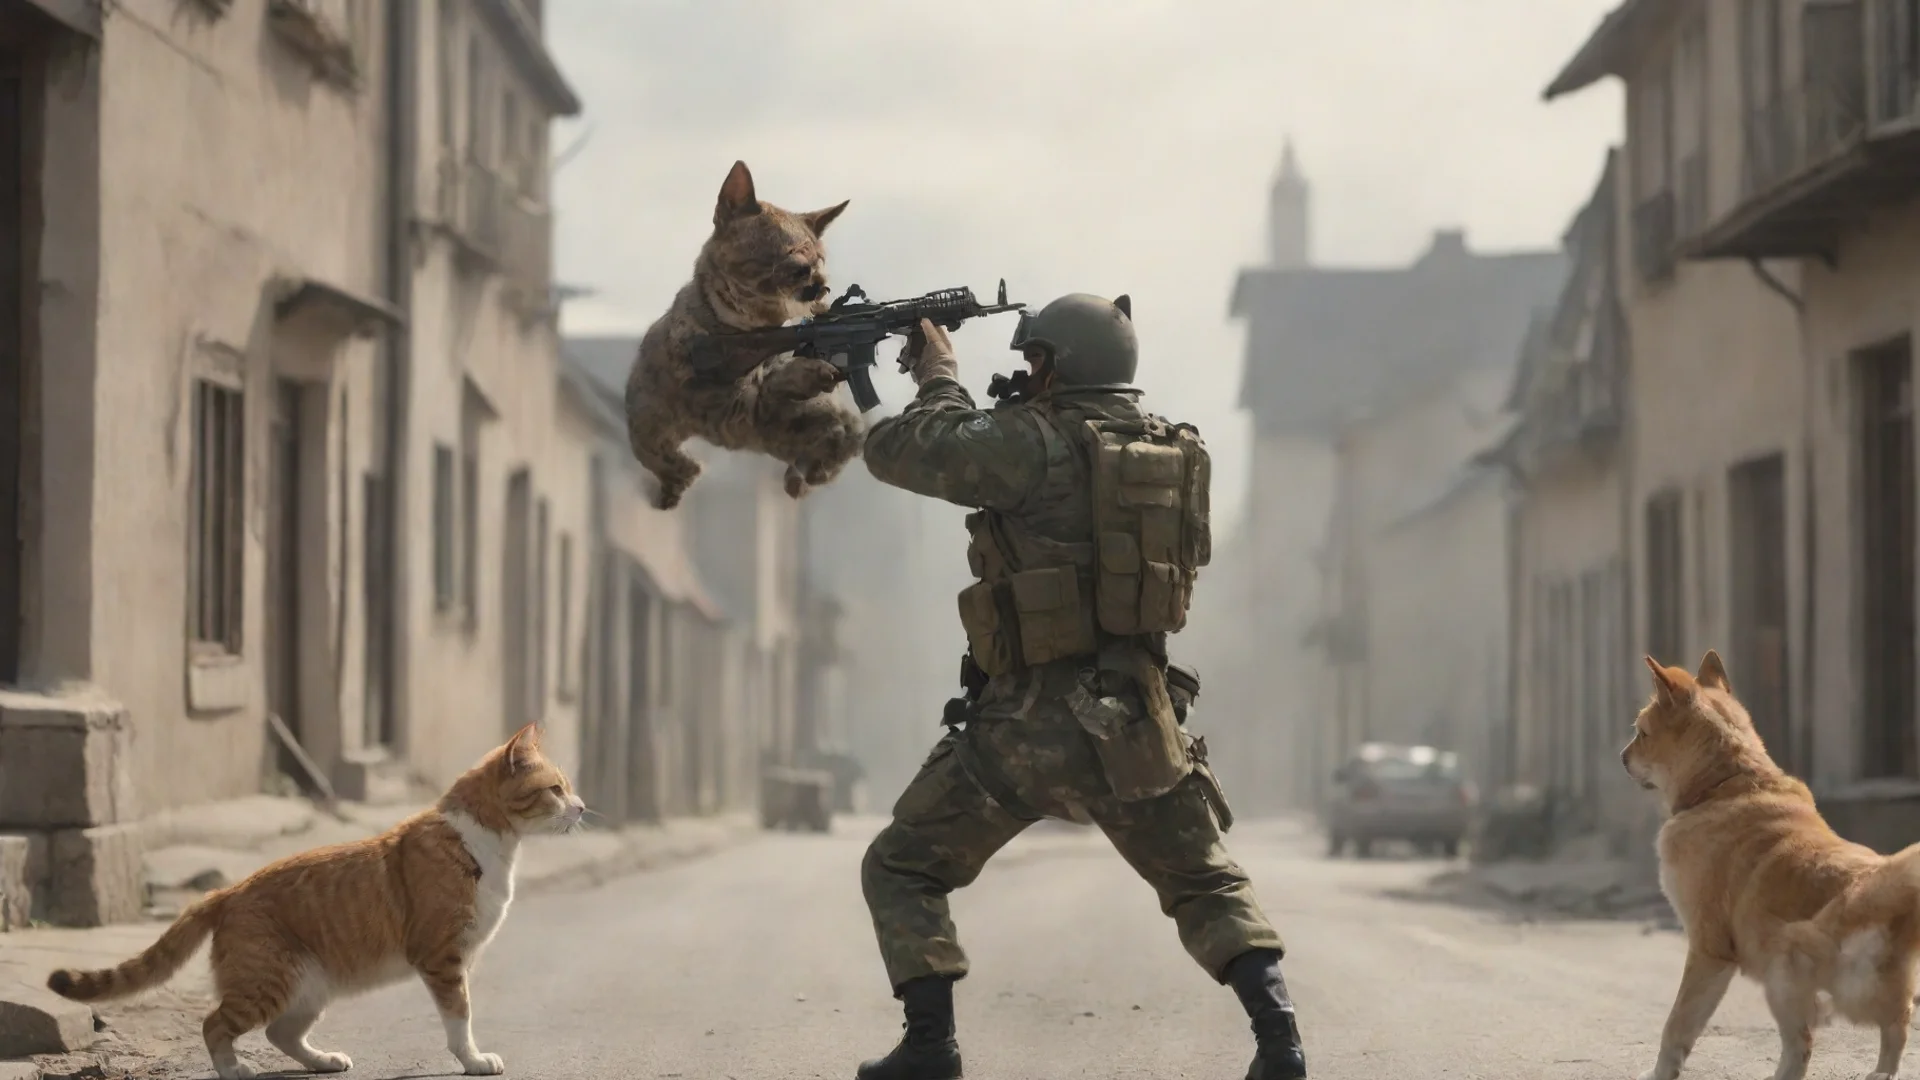 amazing cat soldier shooting dog soldier in a small town awesome portrait 2 wide